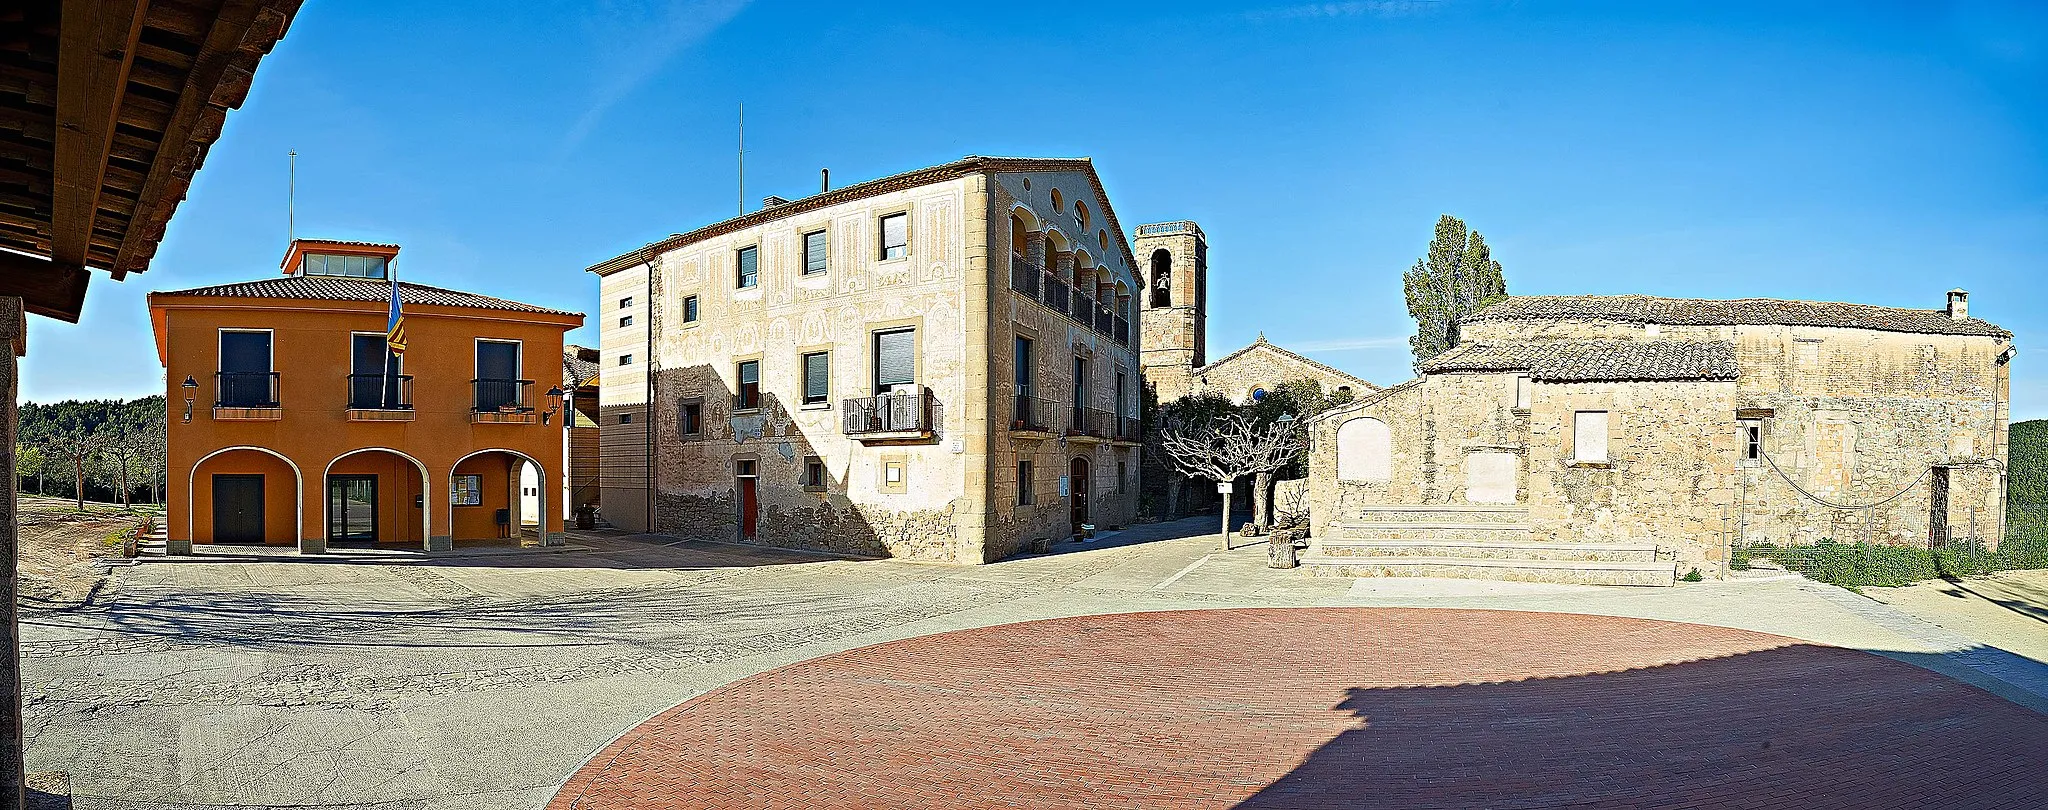 Photo showing: City council & old Rectory of Gaià, Catalonia, Spain